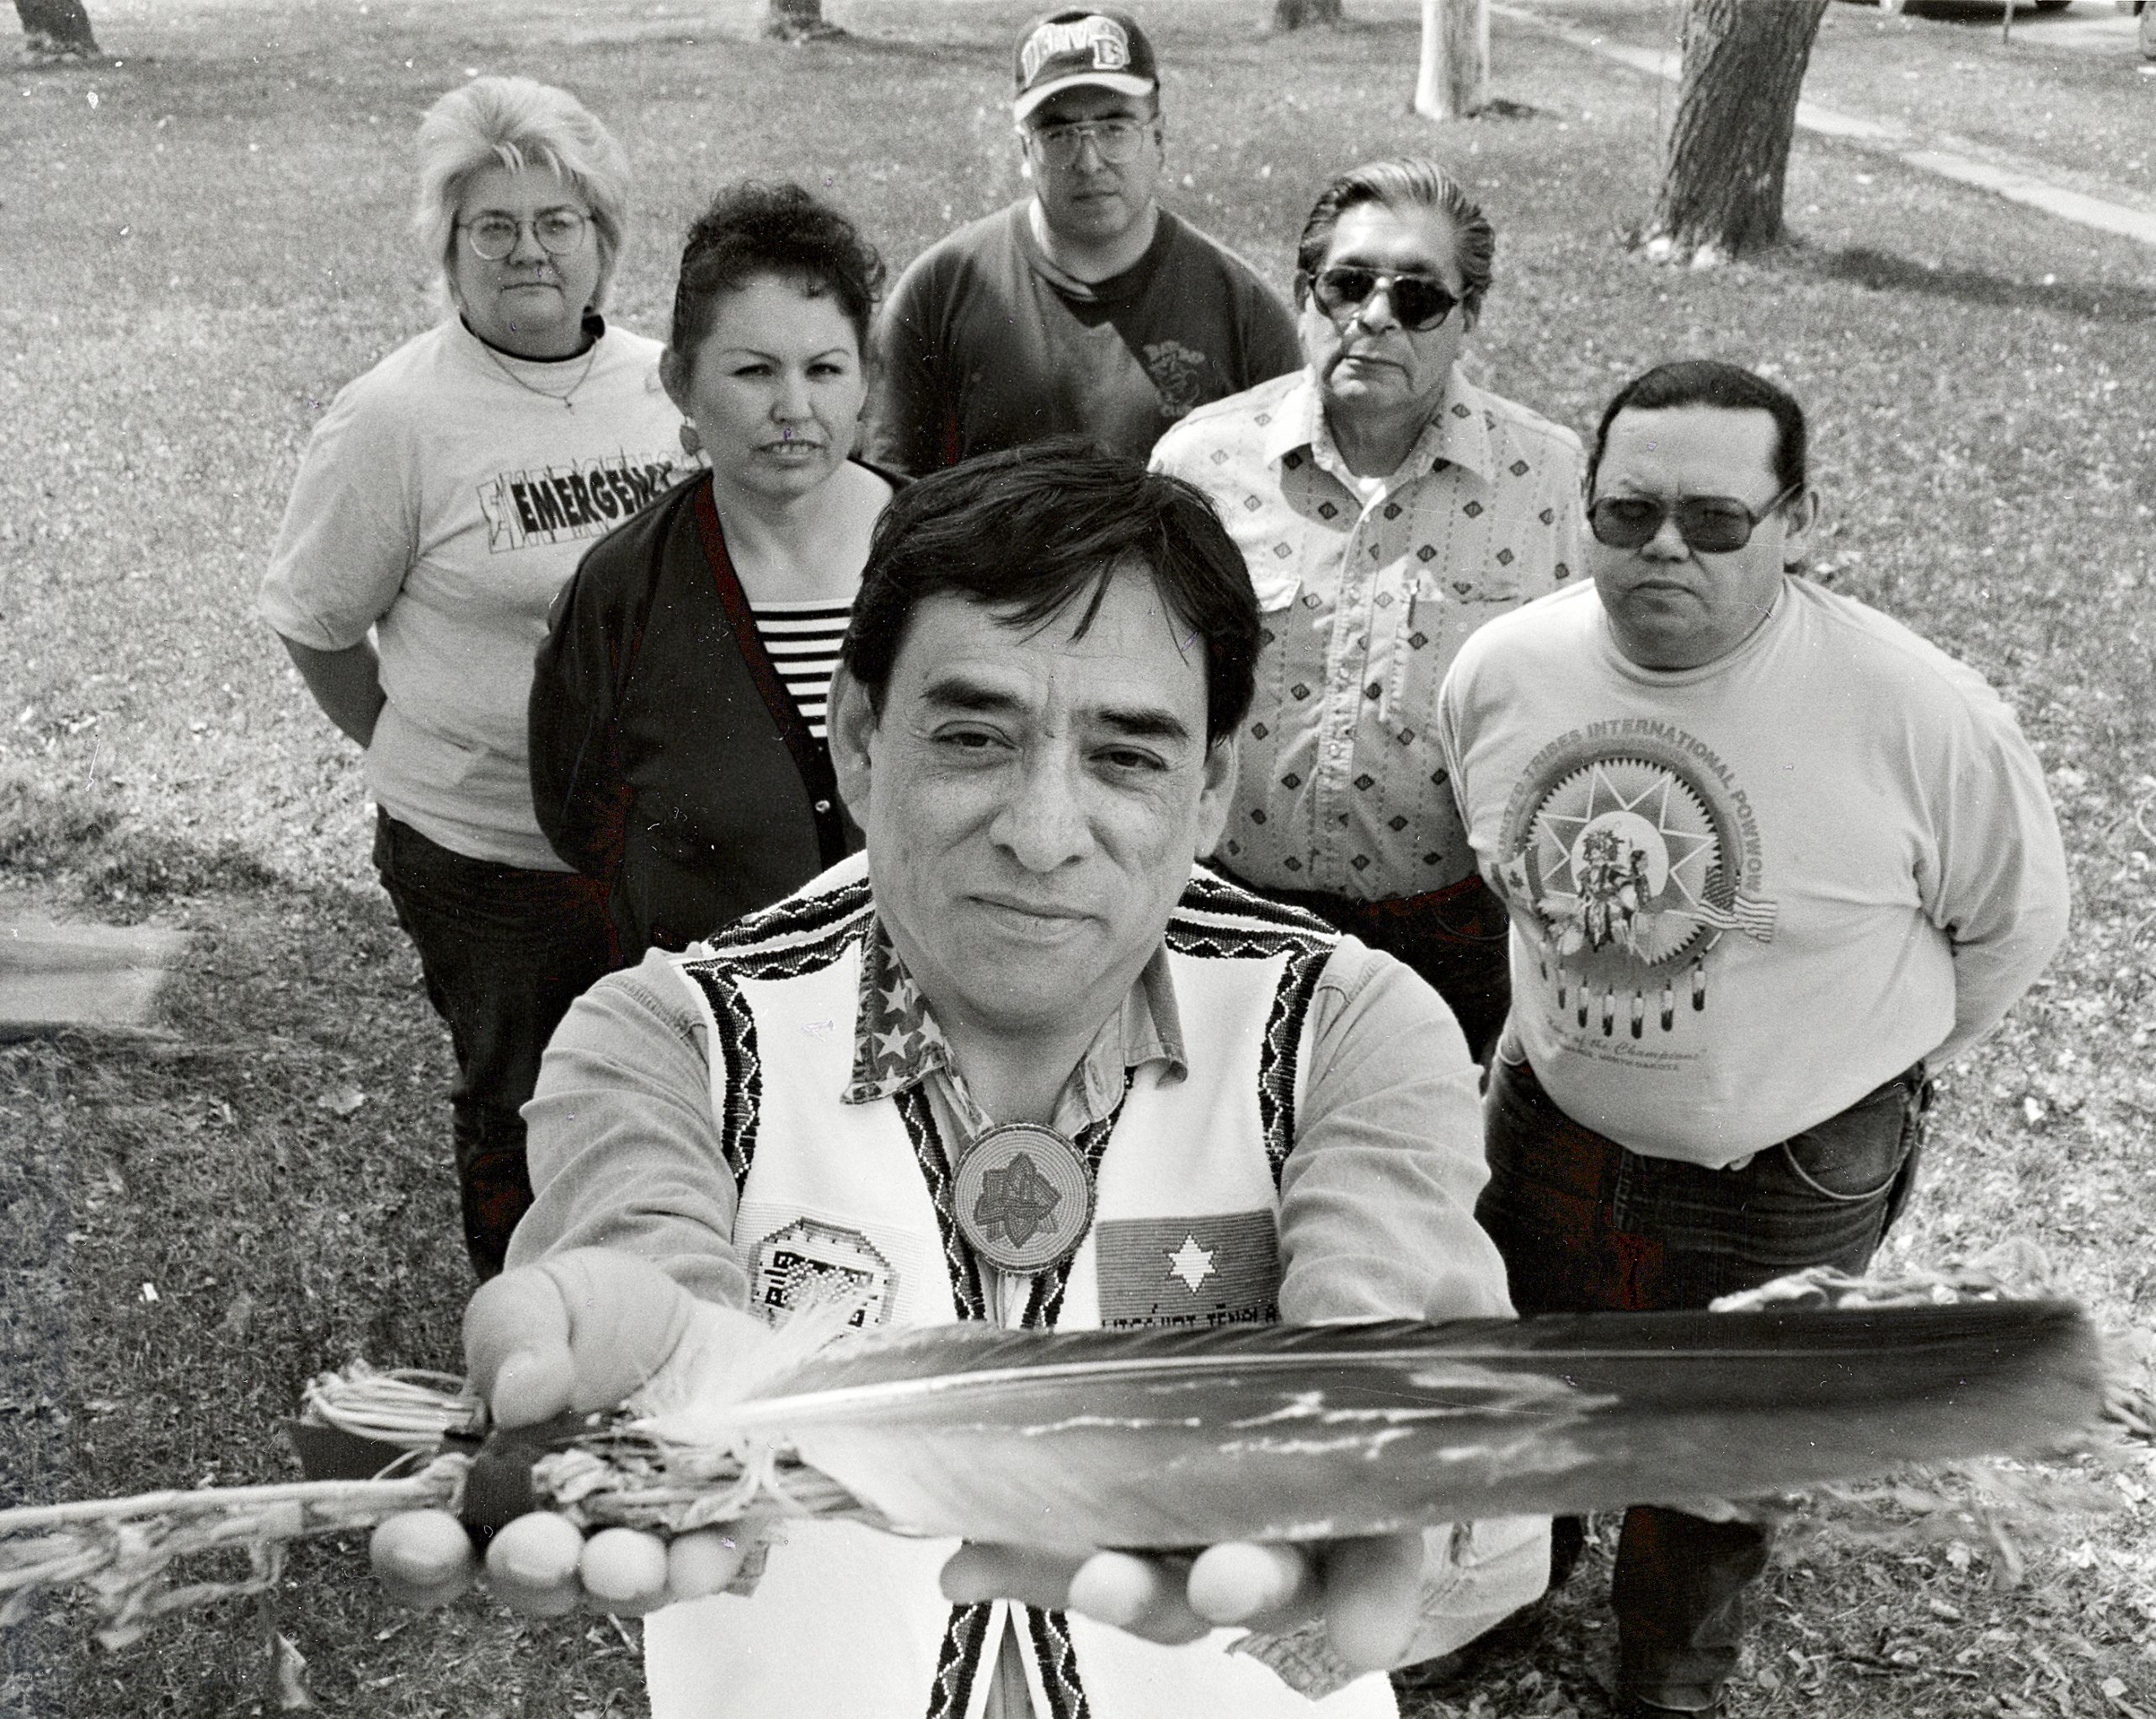 Dr. David Gipp (holding eagle feather) was one of the founders of the tribal college movement.